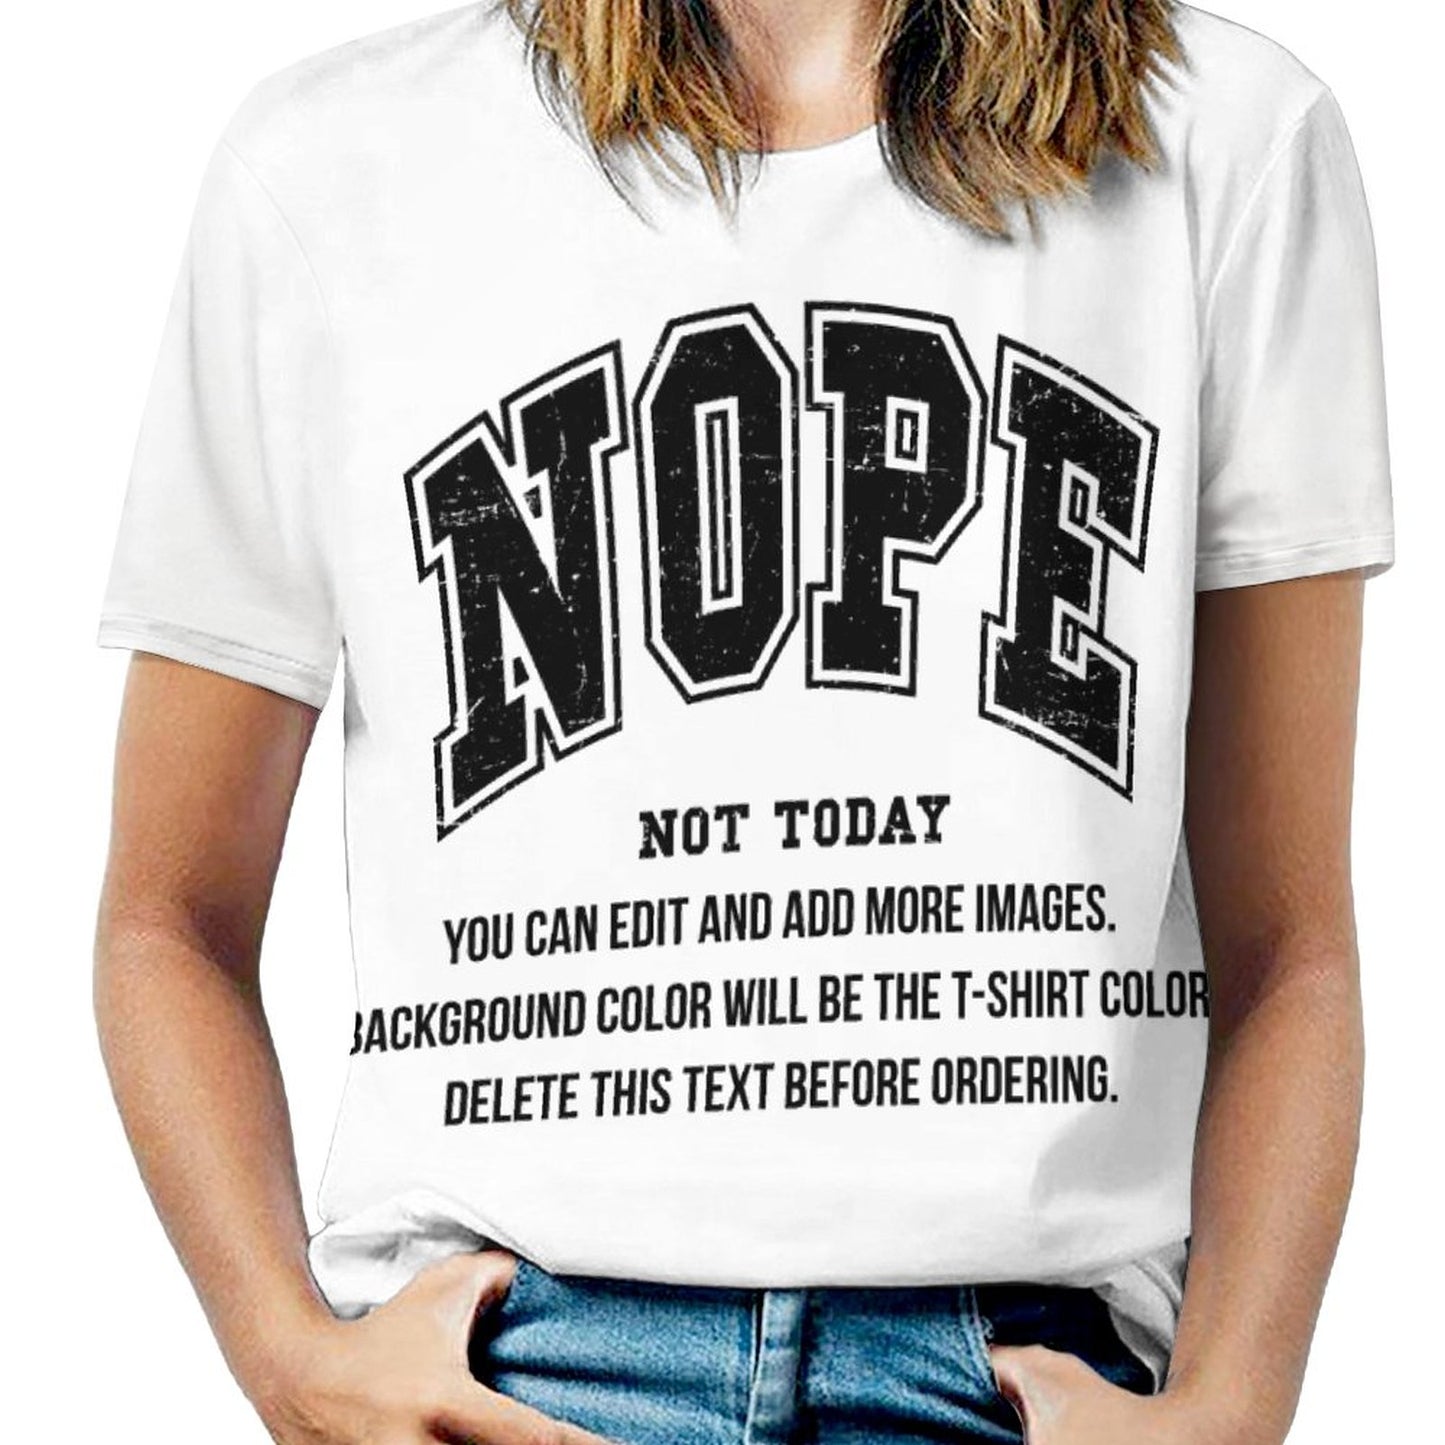 Nope, Not Today-Customize this Design Unisex T-Shirt-S to 6XL